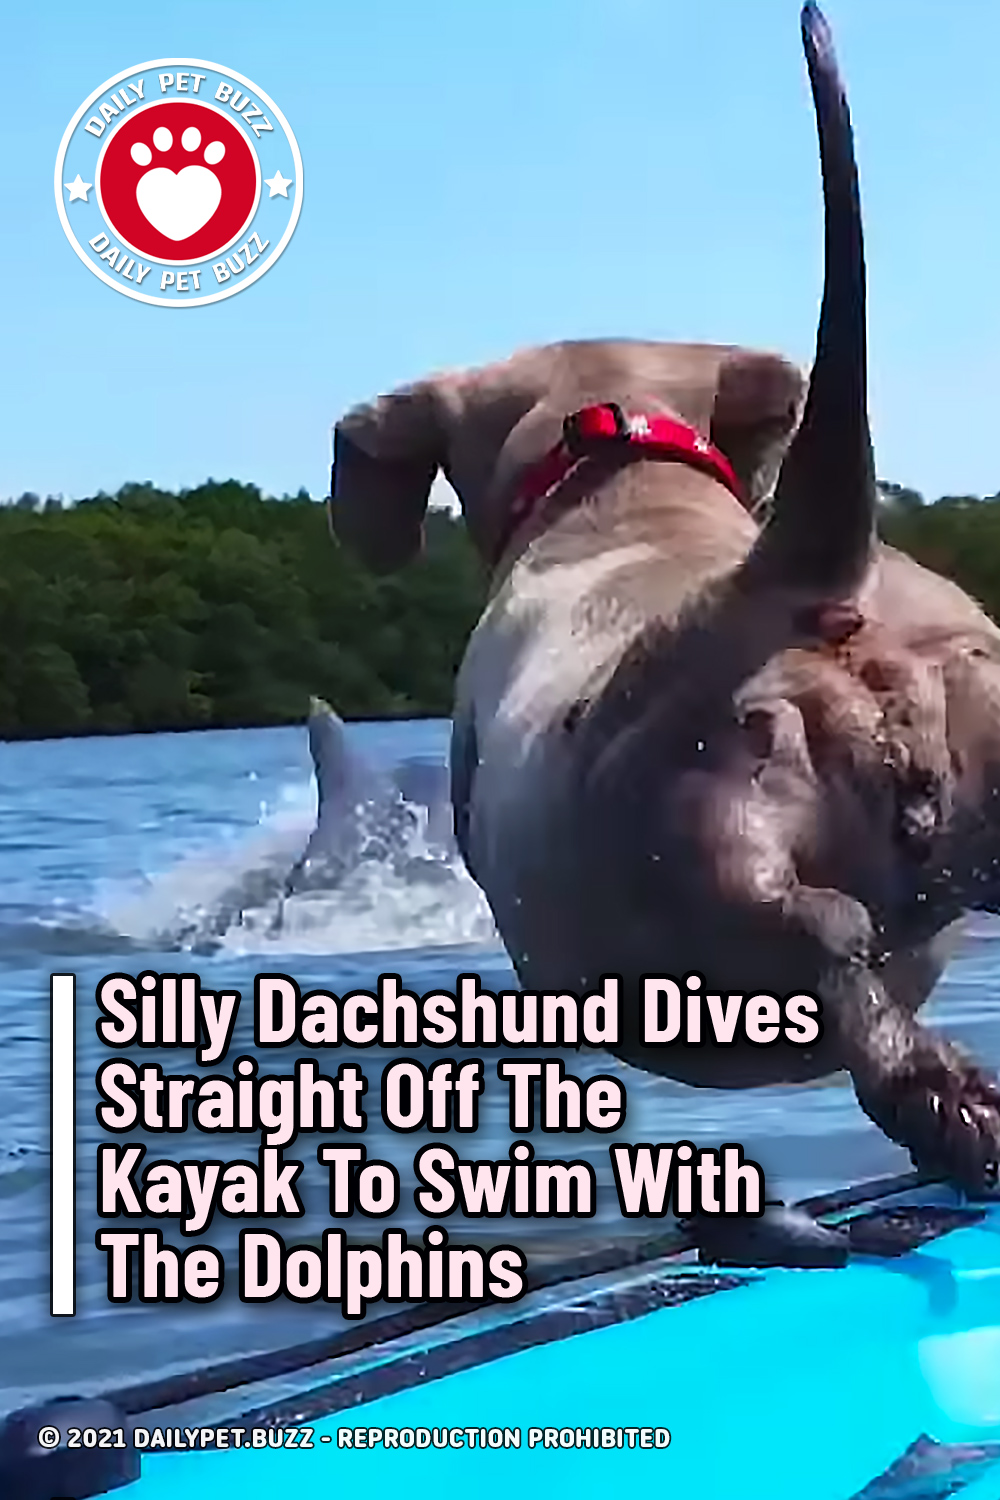 Silly Dachshund Dives Straight Off The Kayak To Swim With The Dolphins